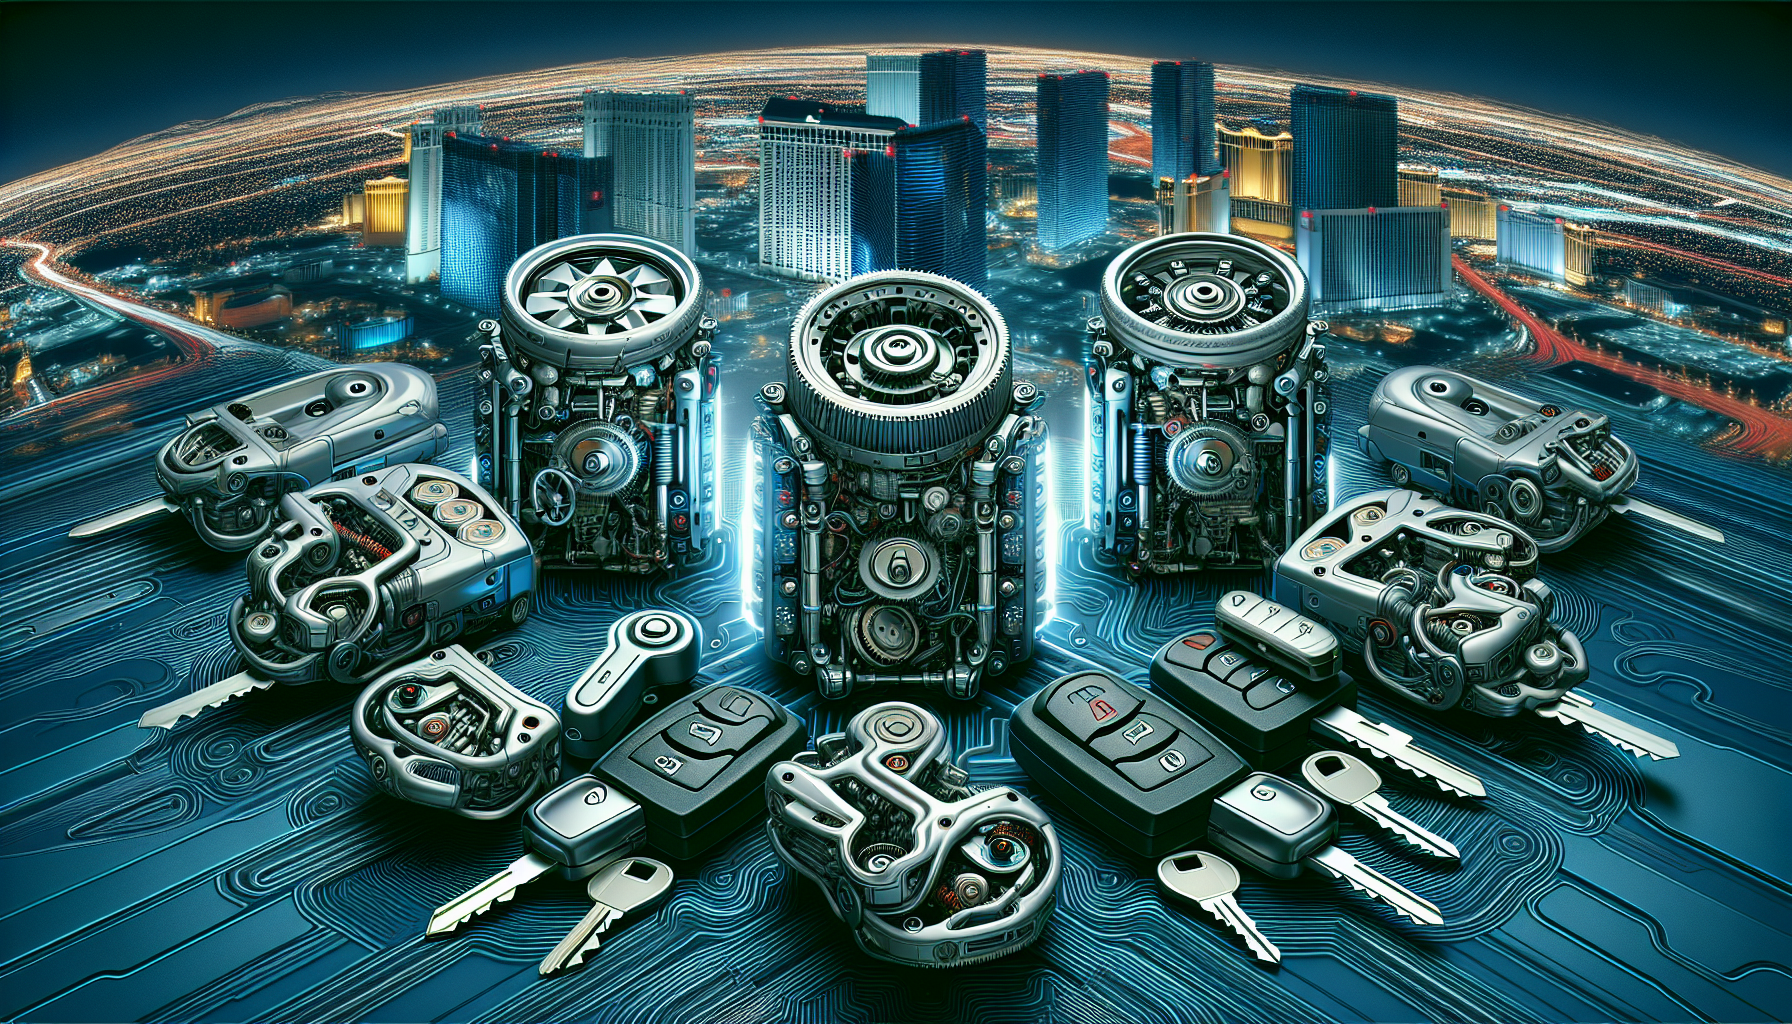 Illustration of high-security locks and keyless entry systems for vehicles in Las Vegas